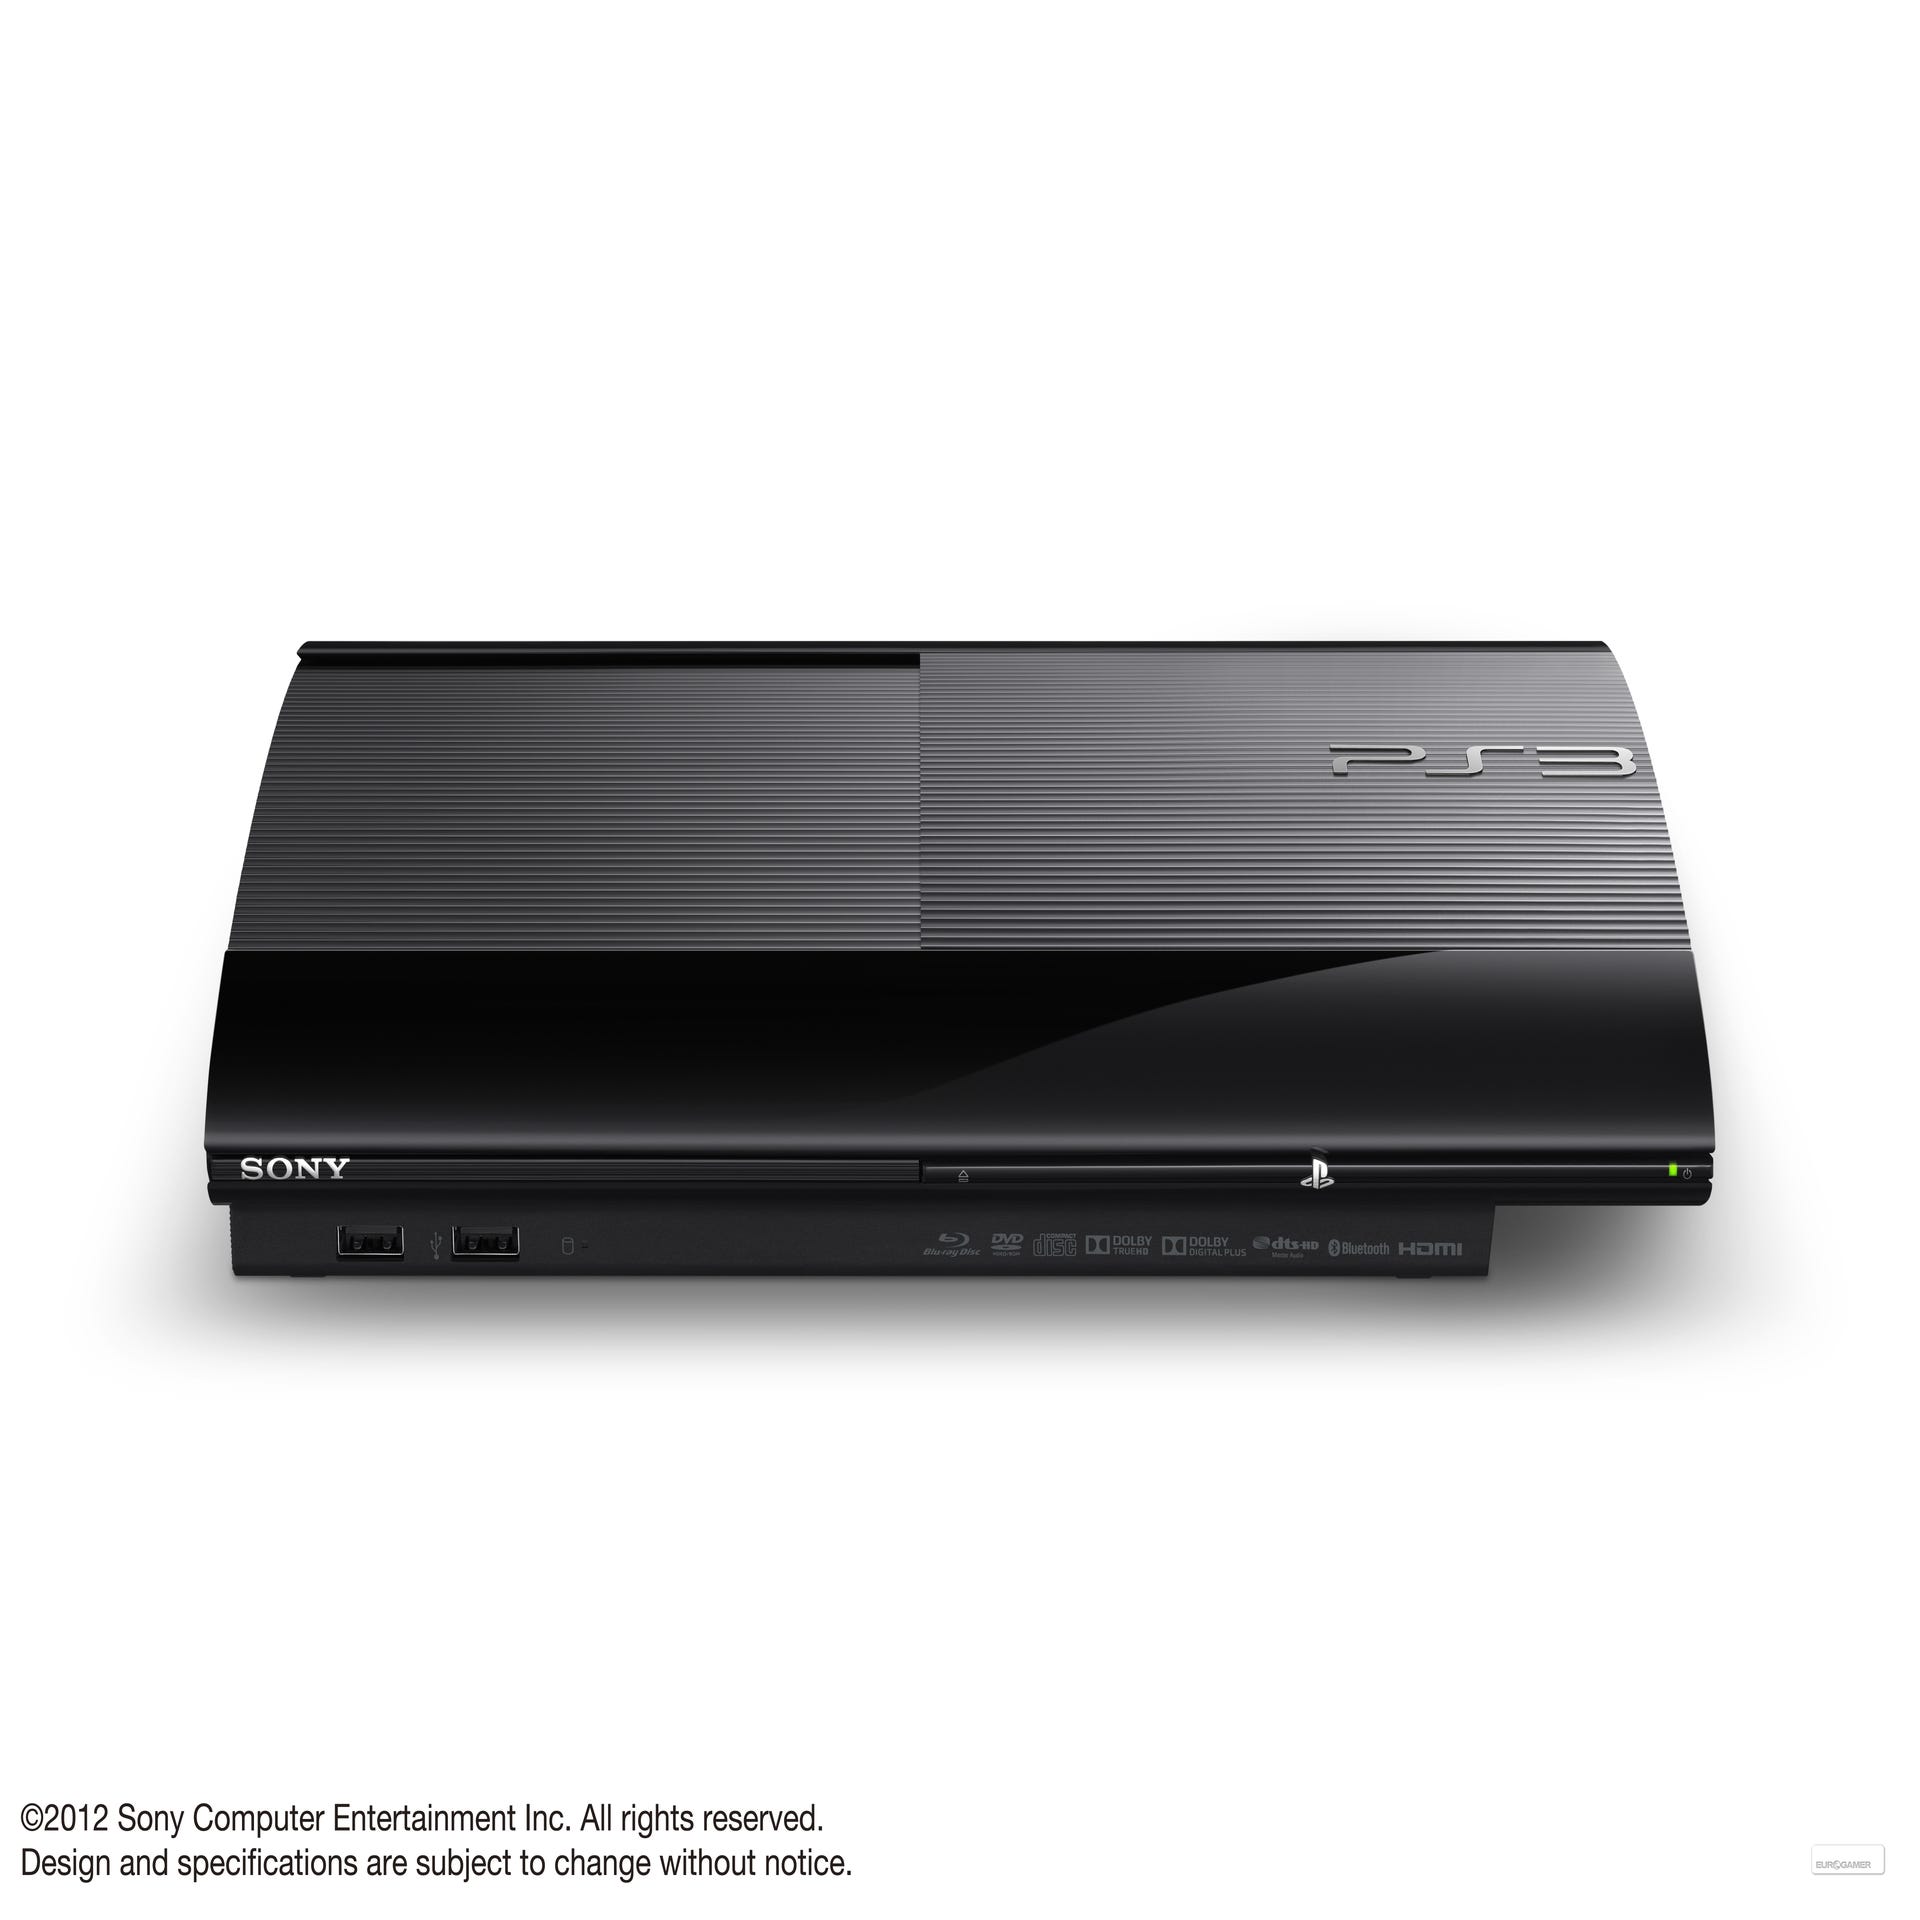 New Sony PlayStation 3 is slimmer, has 12GB flash memory - CNET